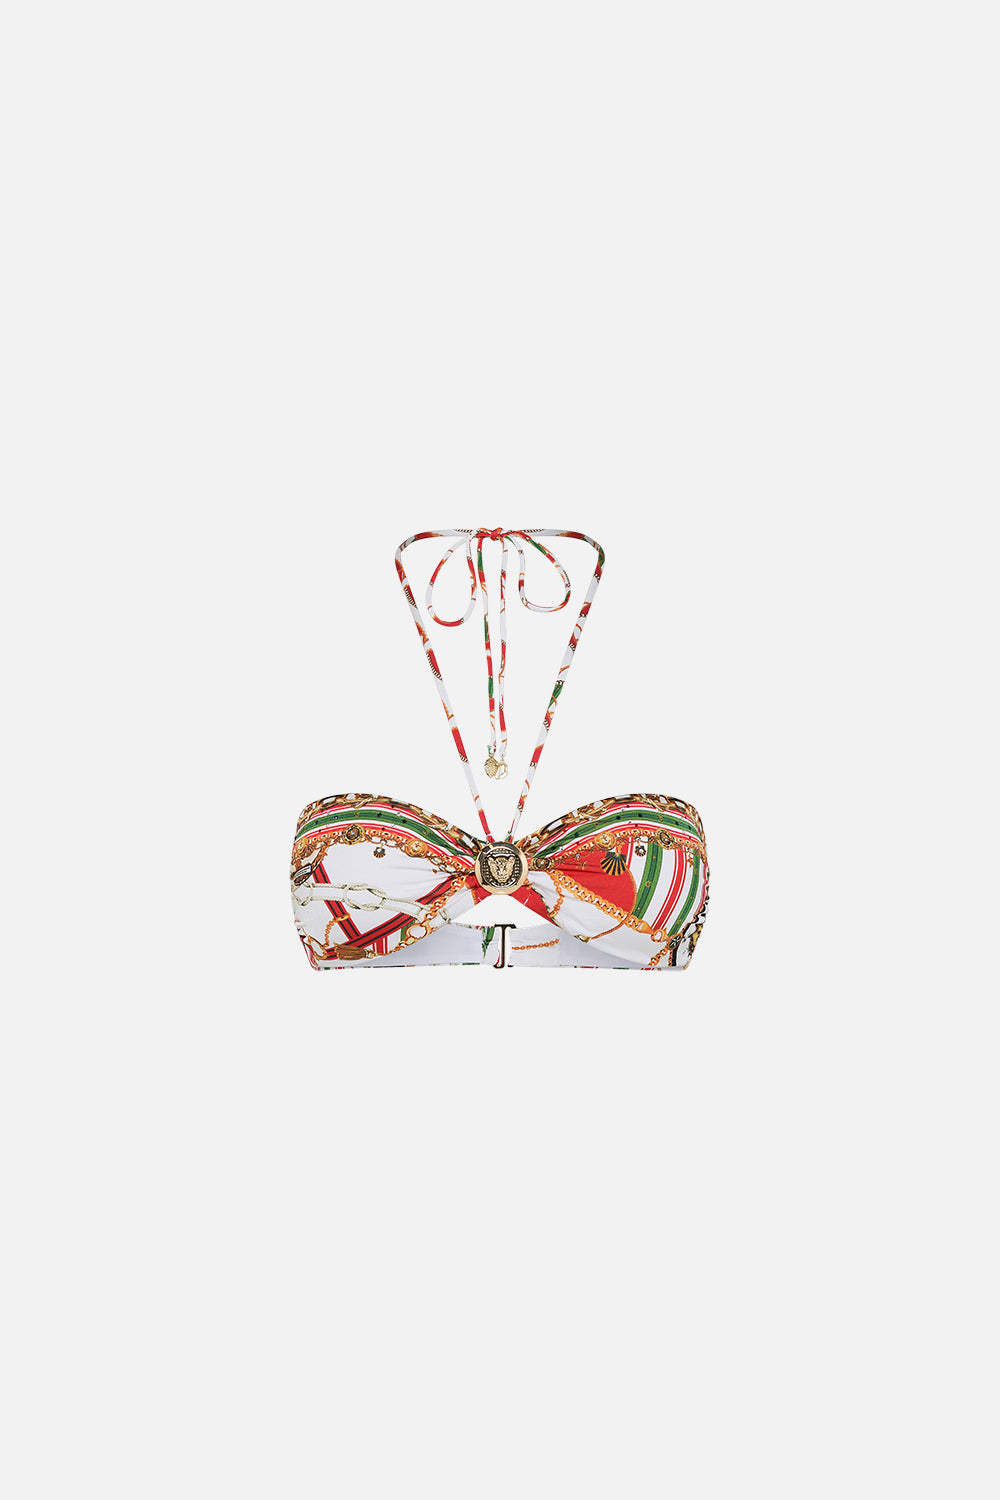 Product view of CAMILLA bandeau in Saluti Summertime print